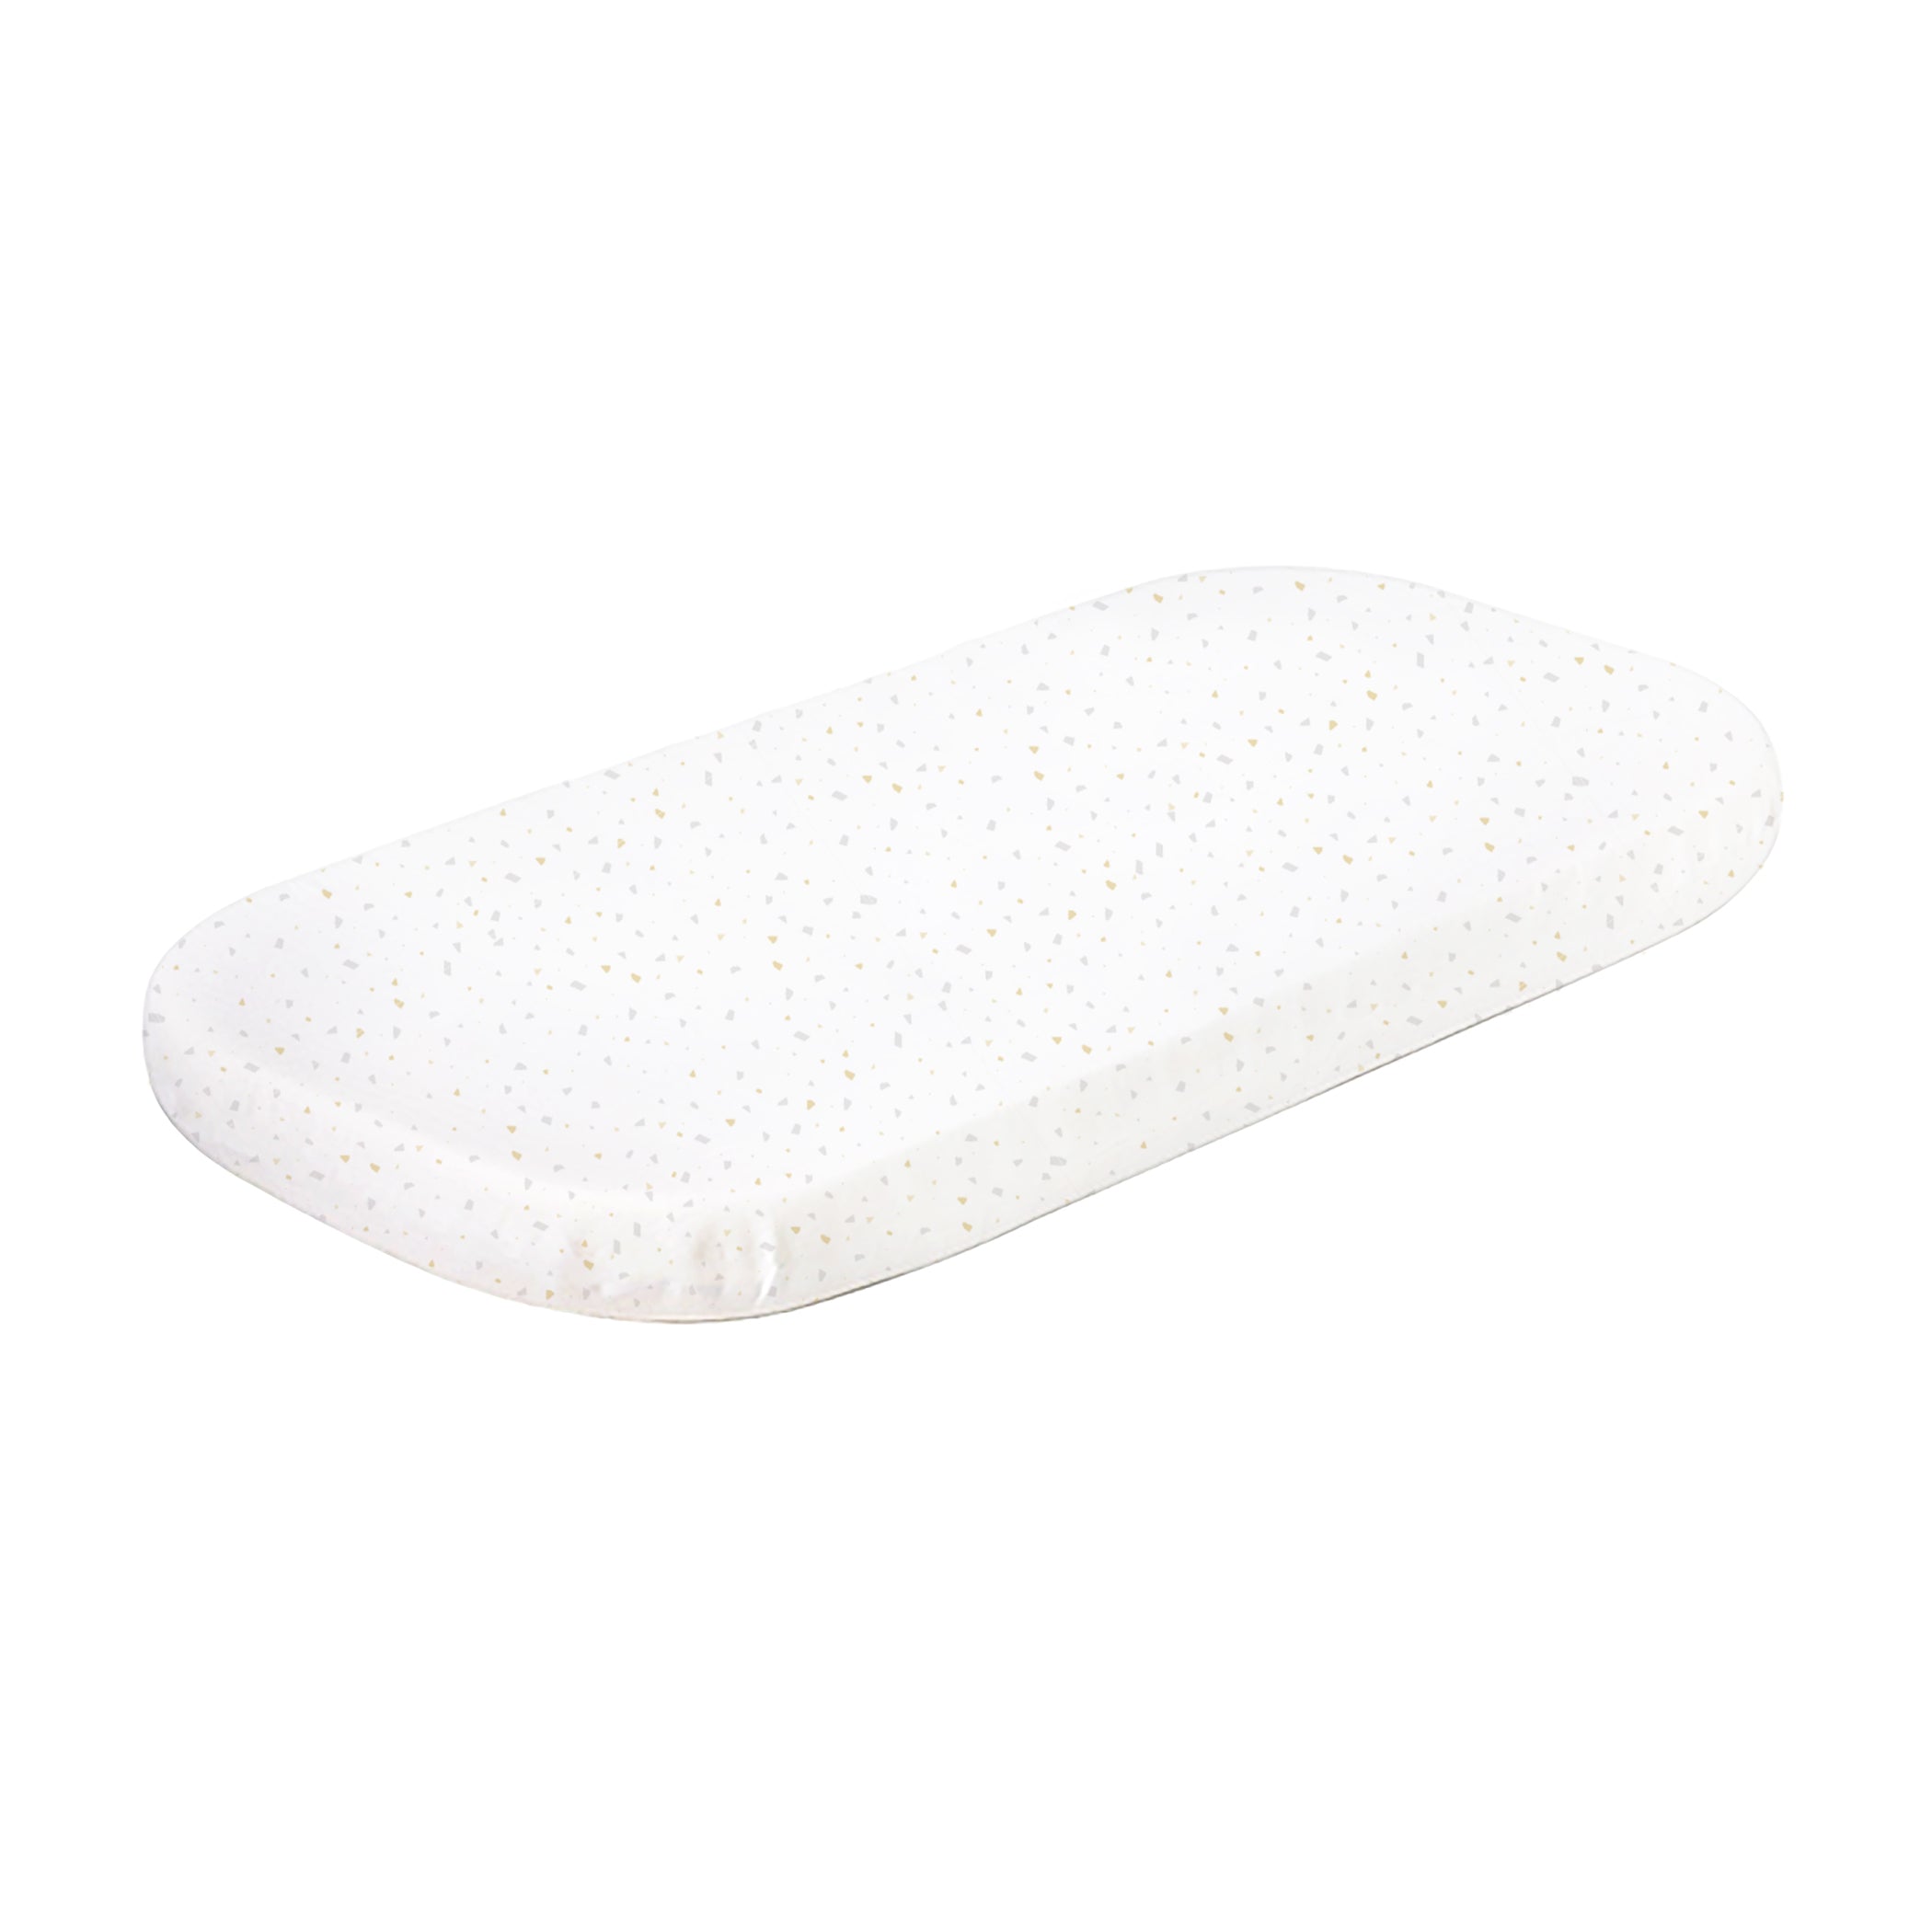 Terrazzo 2pk Bassinet/Cradle Fitted Sheet White/Wheat